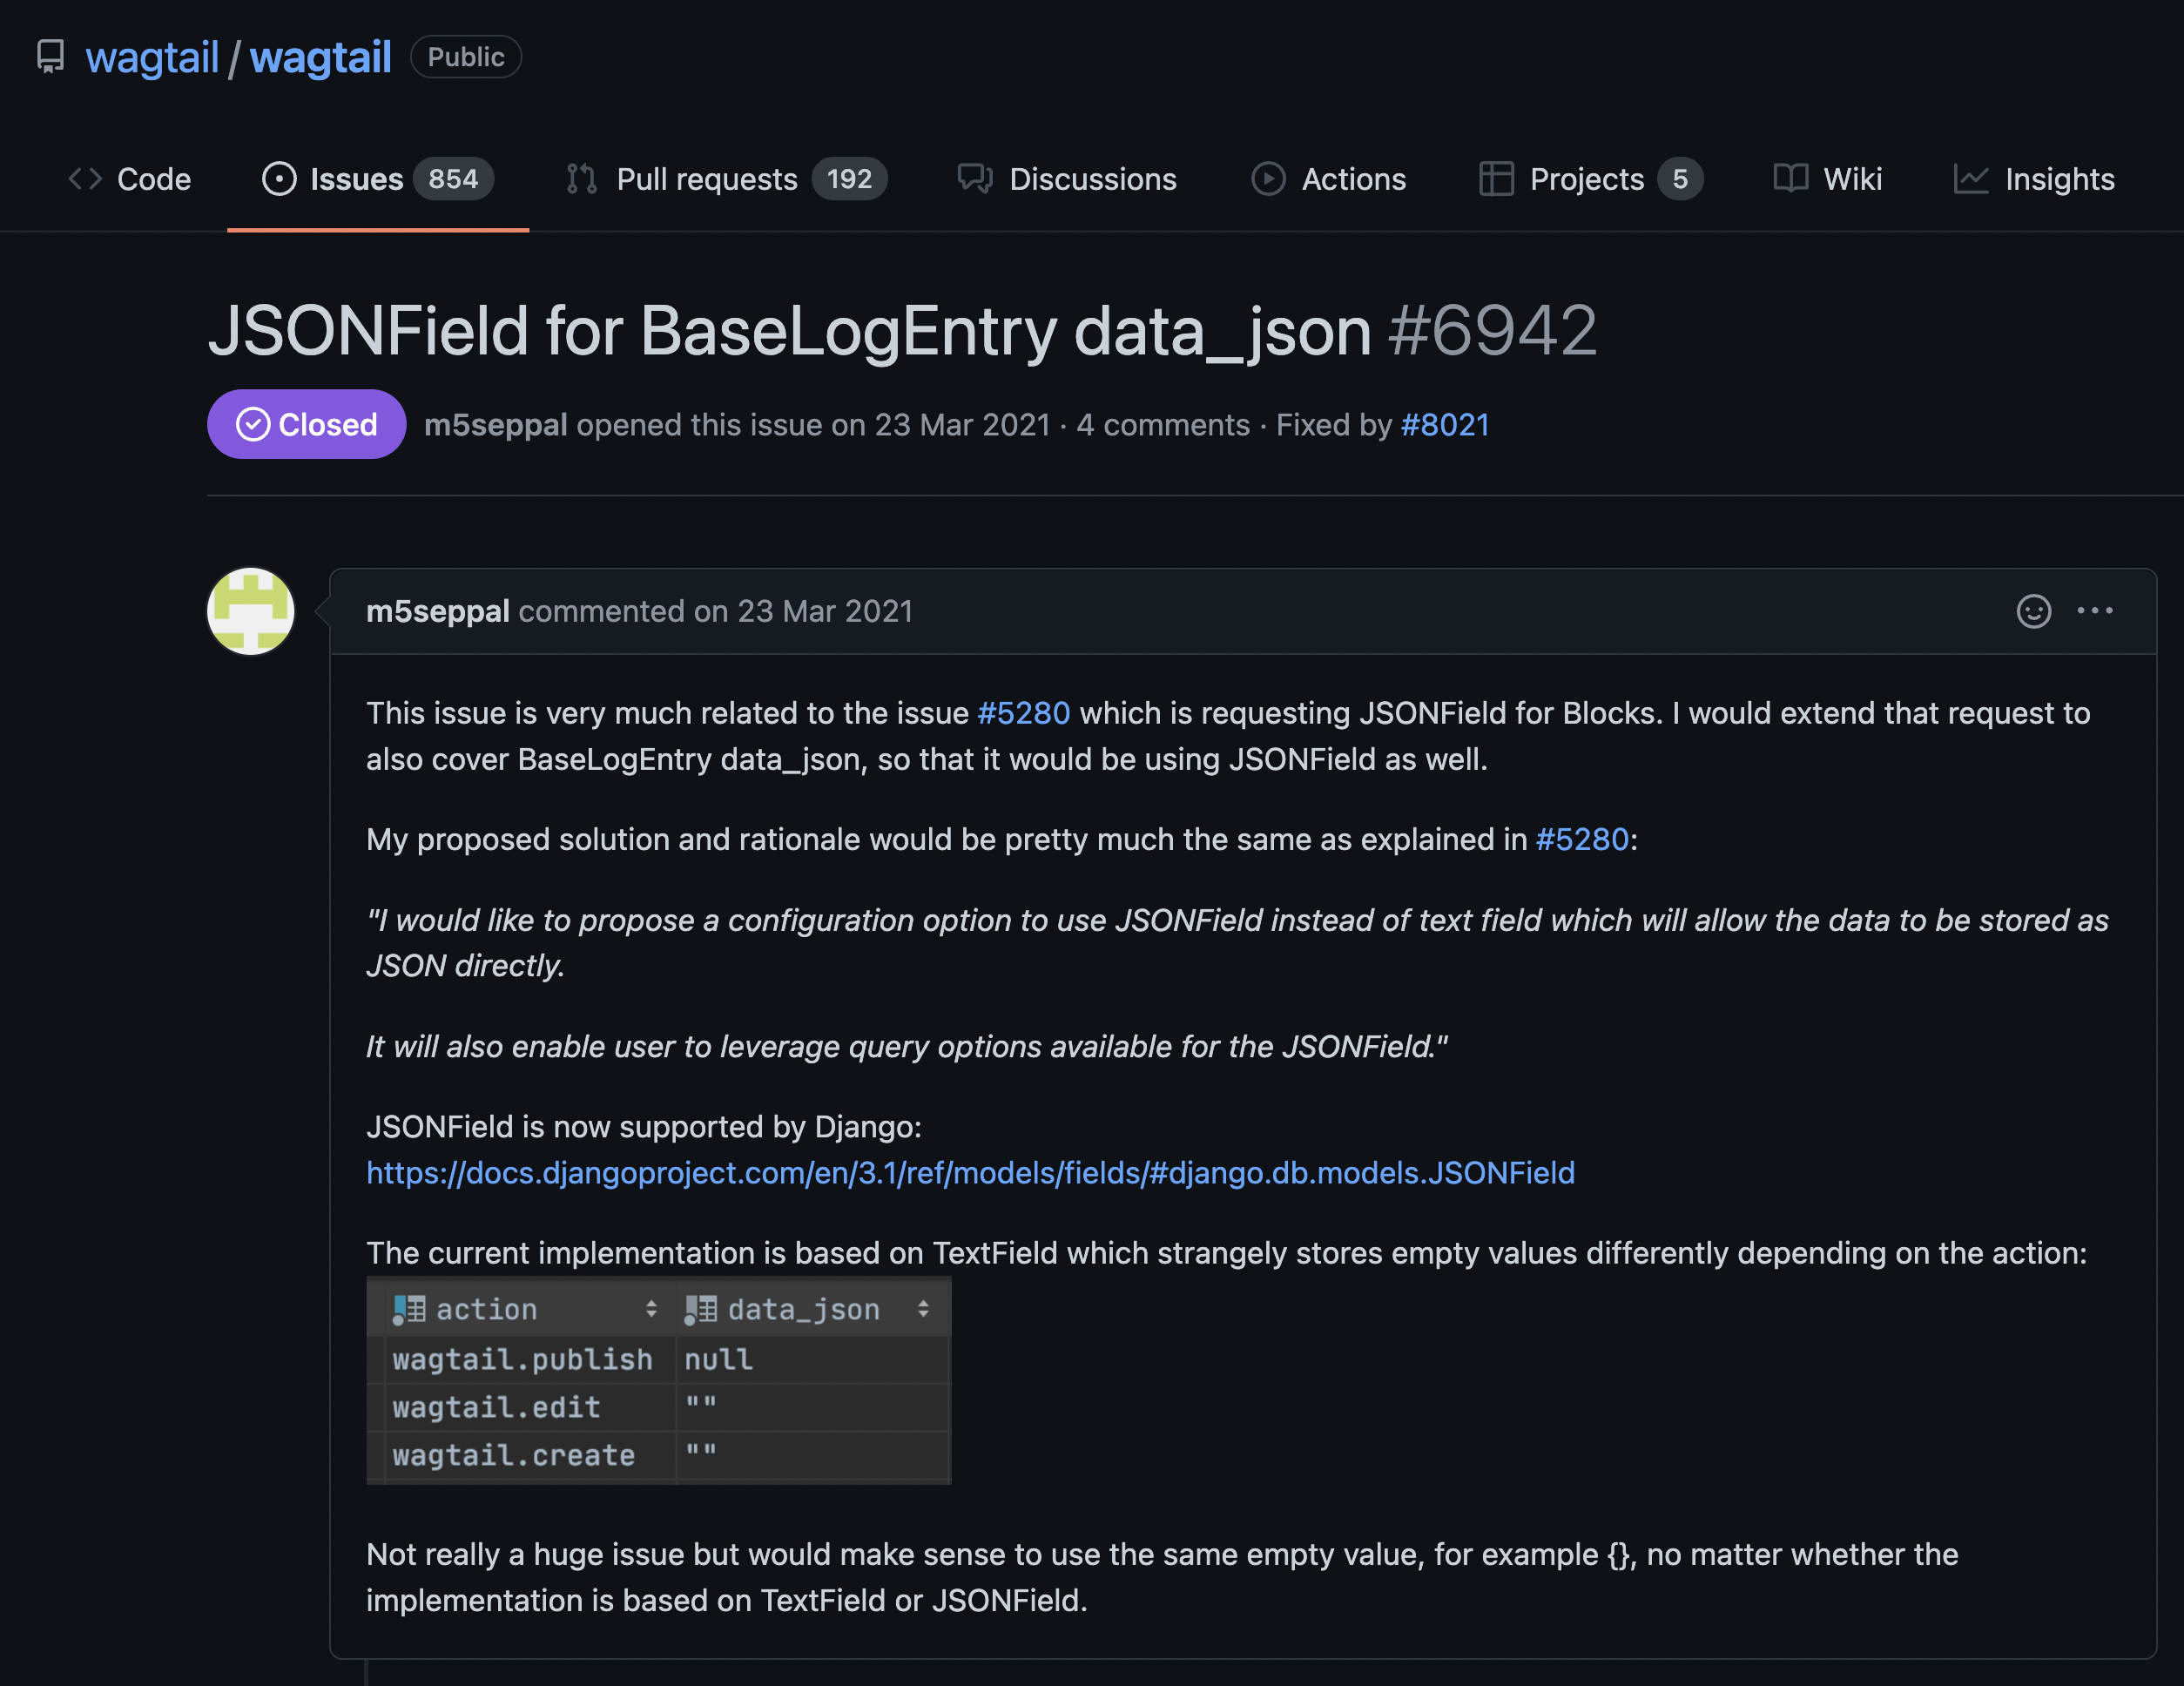 Issue #6942 on Wagtail, requesting BaseLogEntry to use JSONField